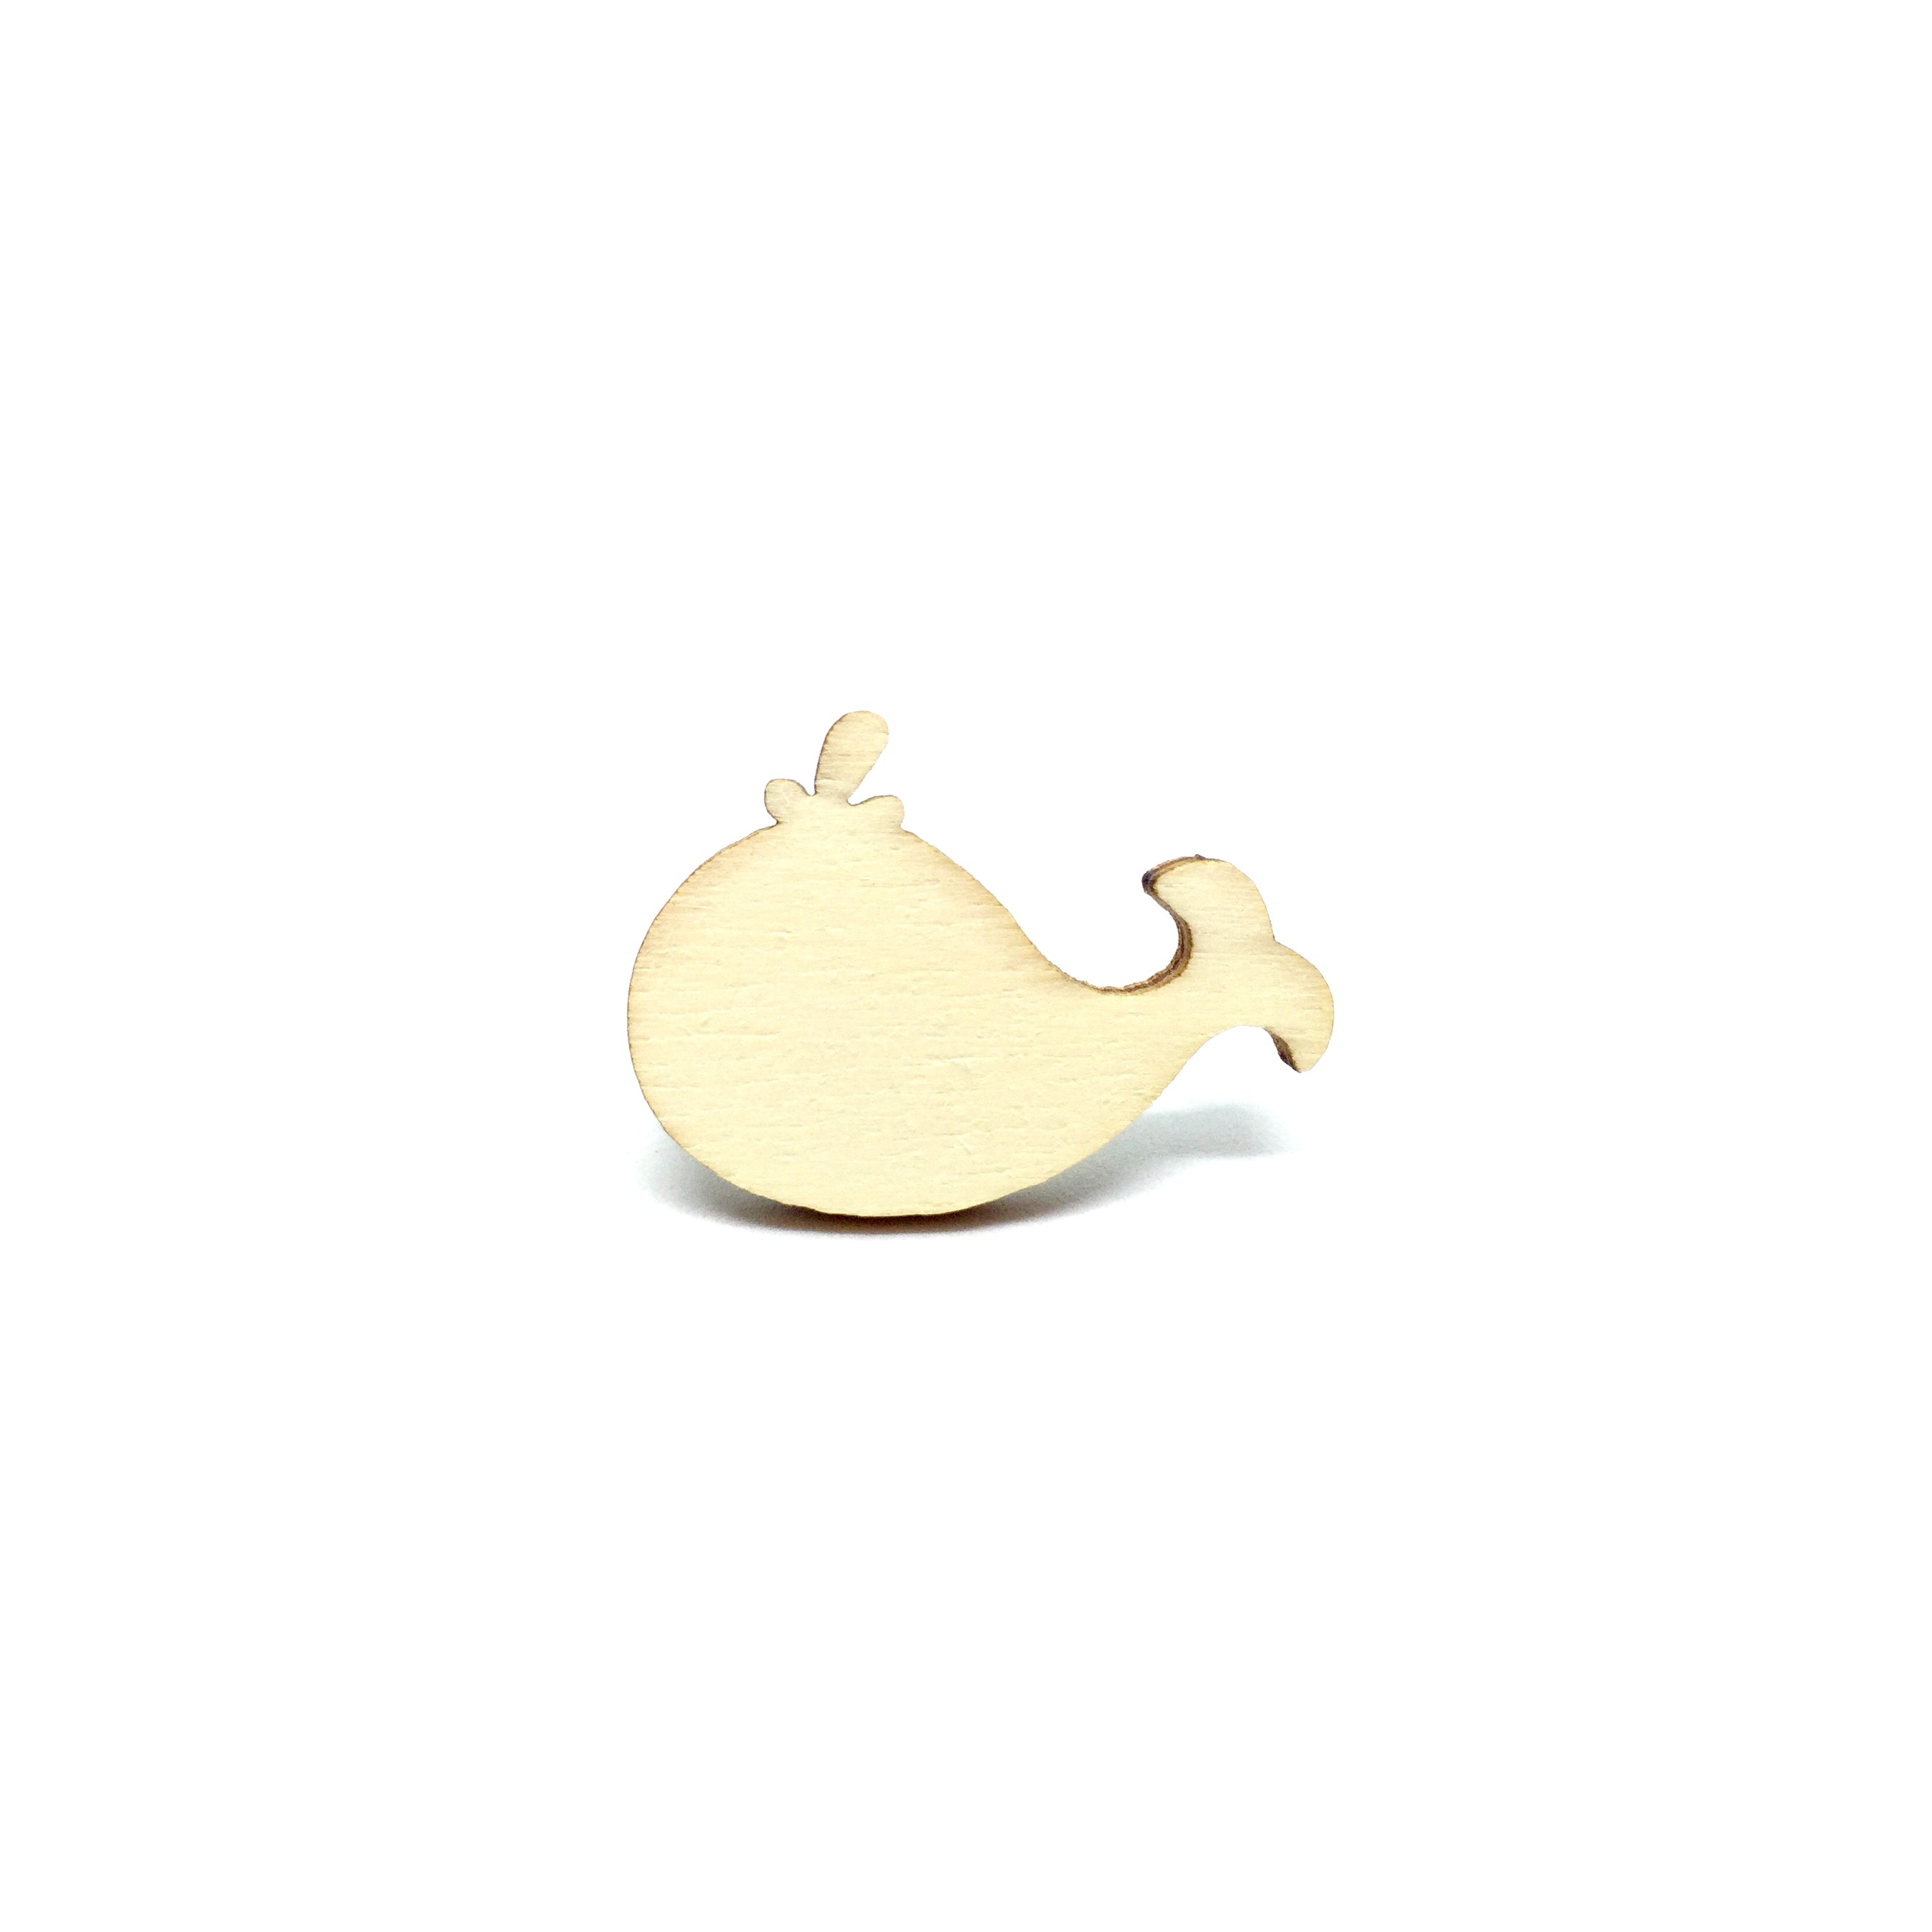 Adorable Whale Wooden Brooch Pin - LM